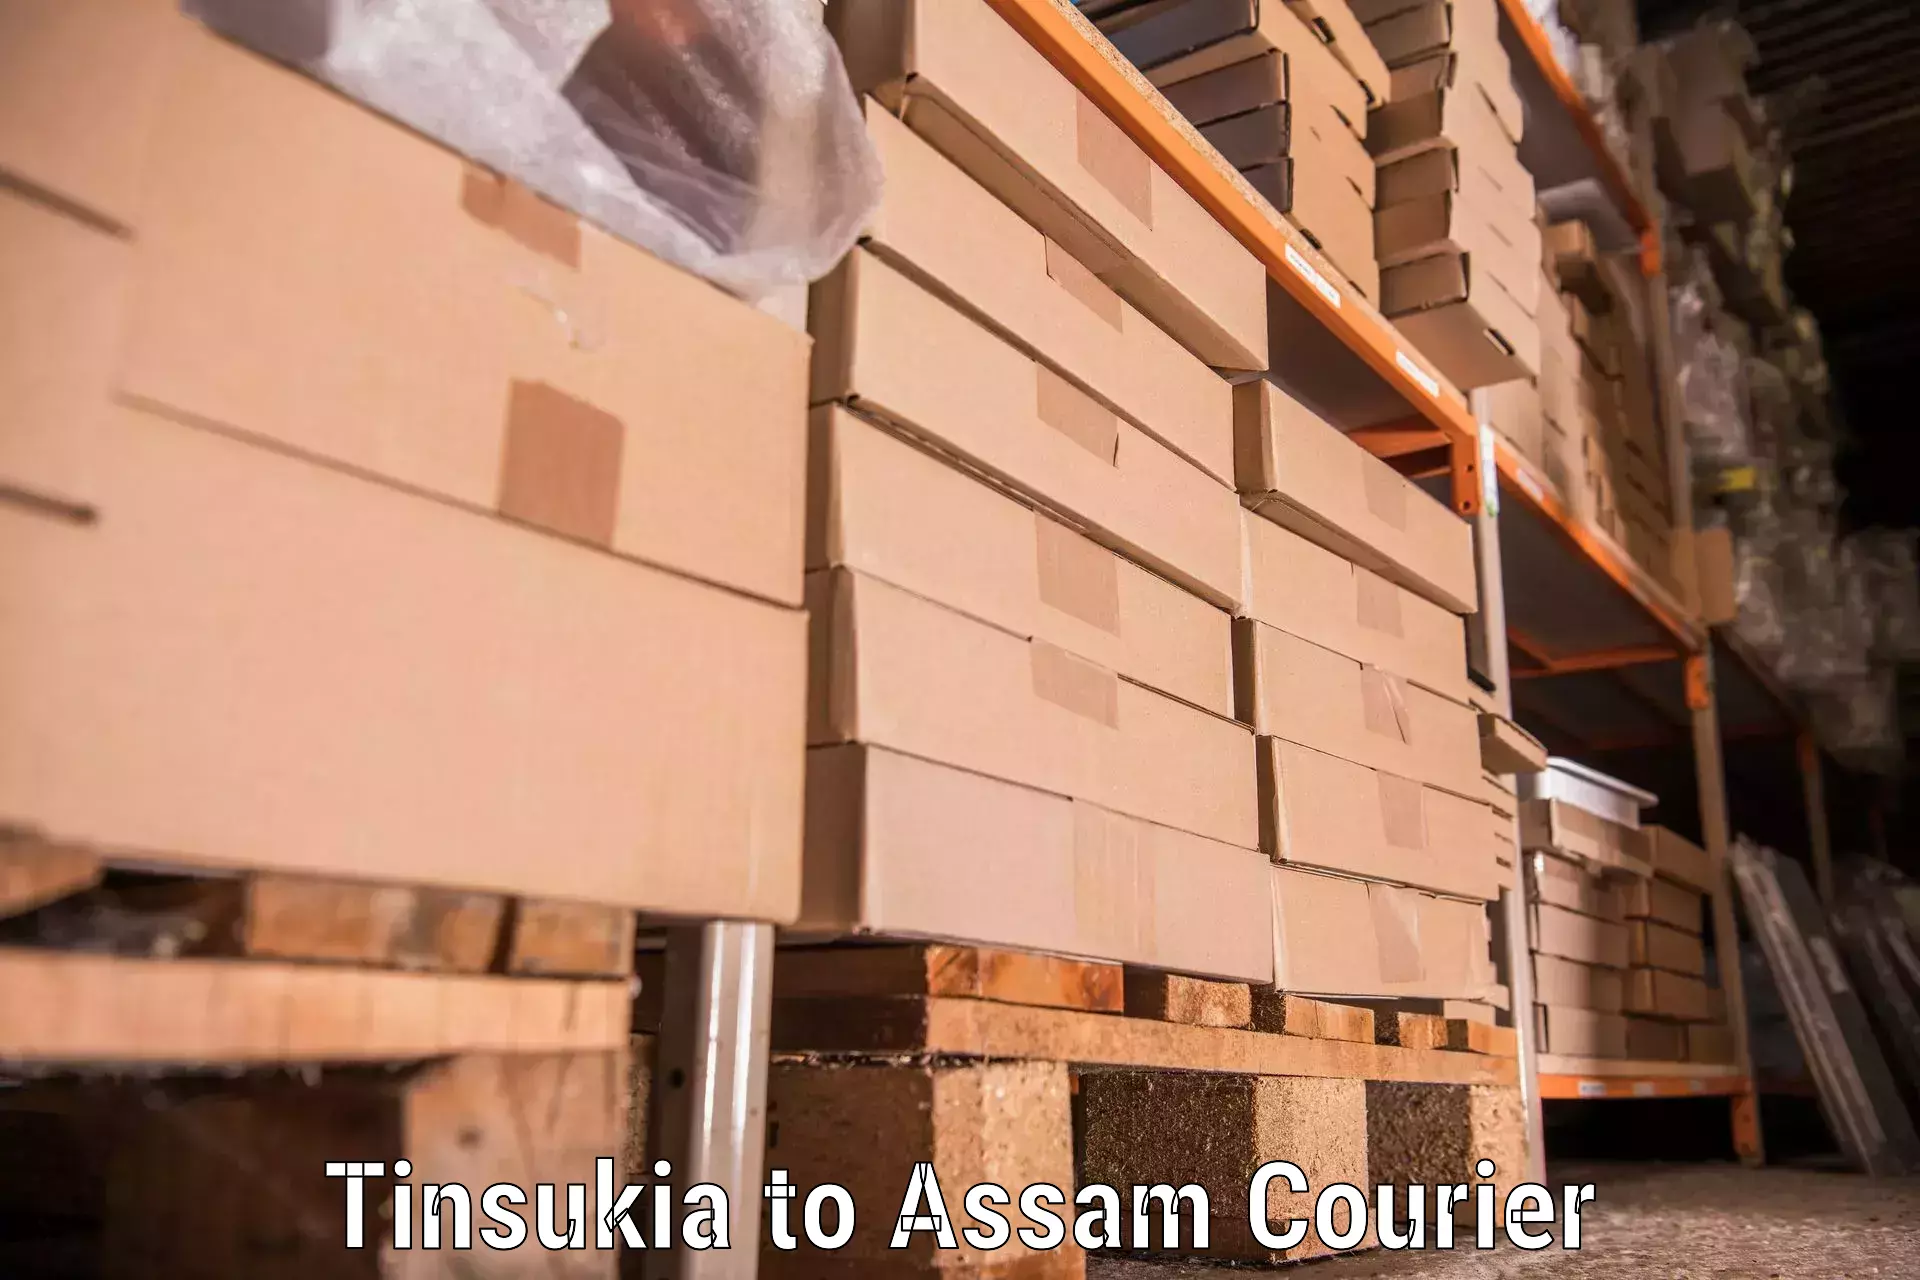 Trusted relocation experts Tinsukia to Assam